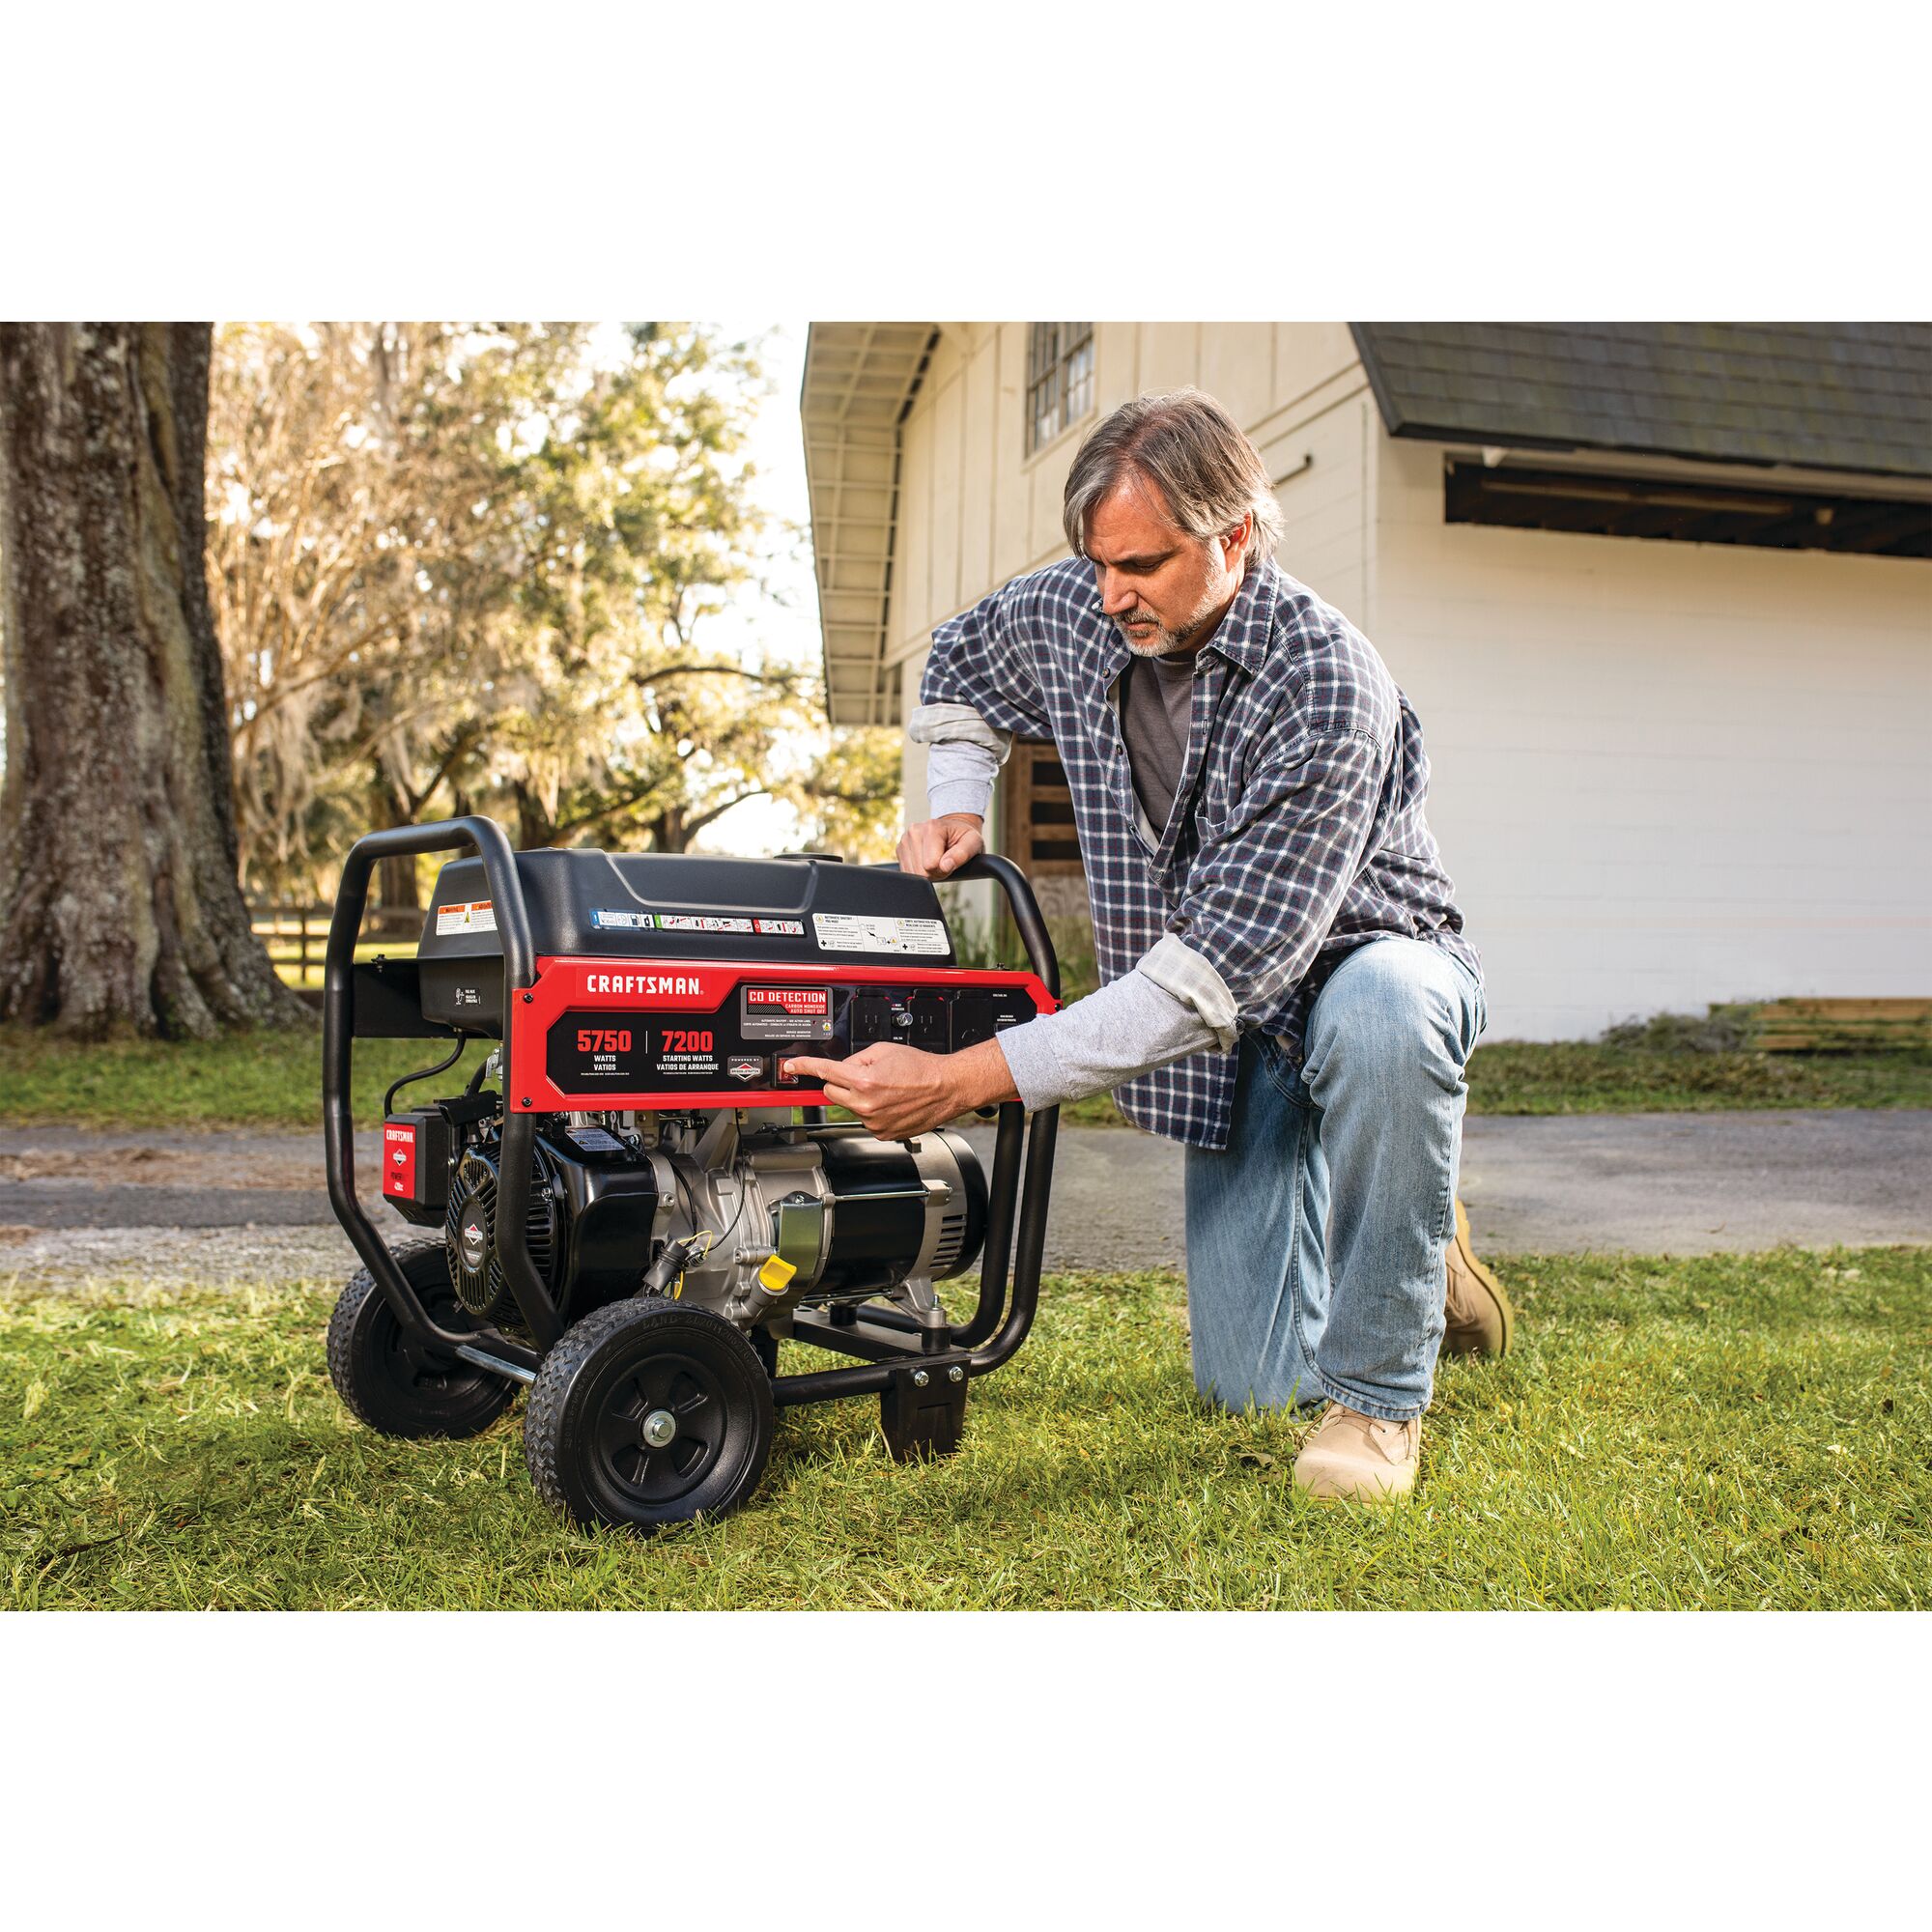 5750 watt portable generator being used by a person.